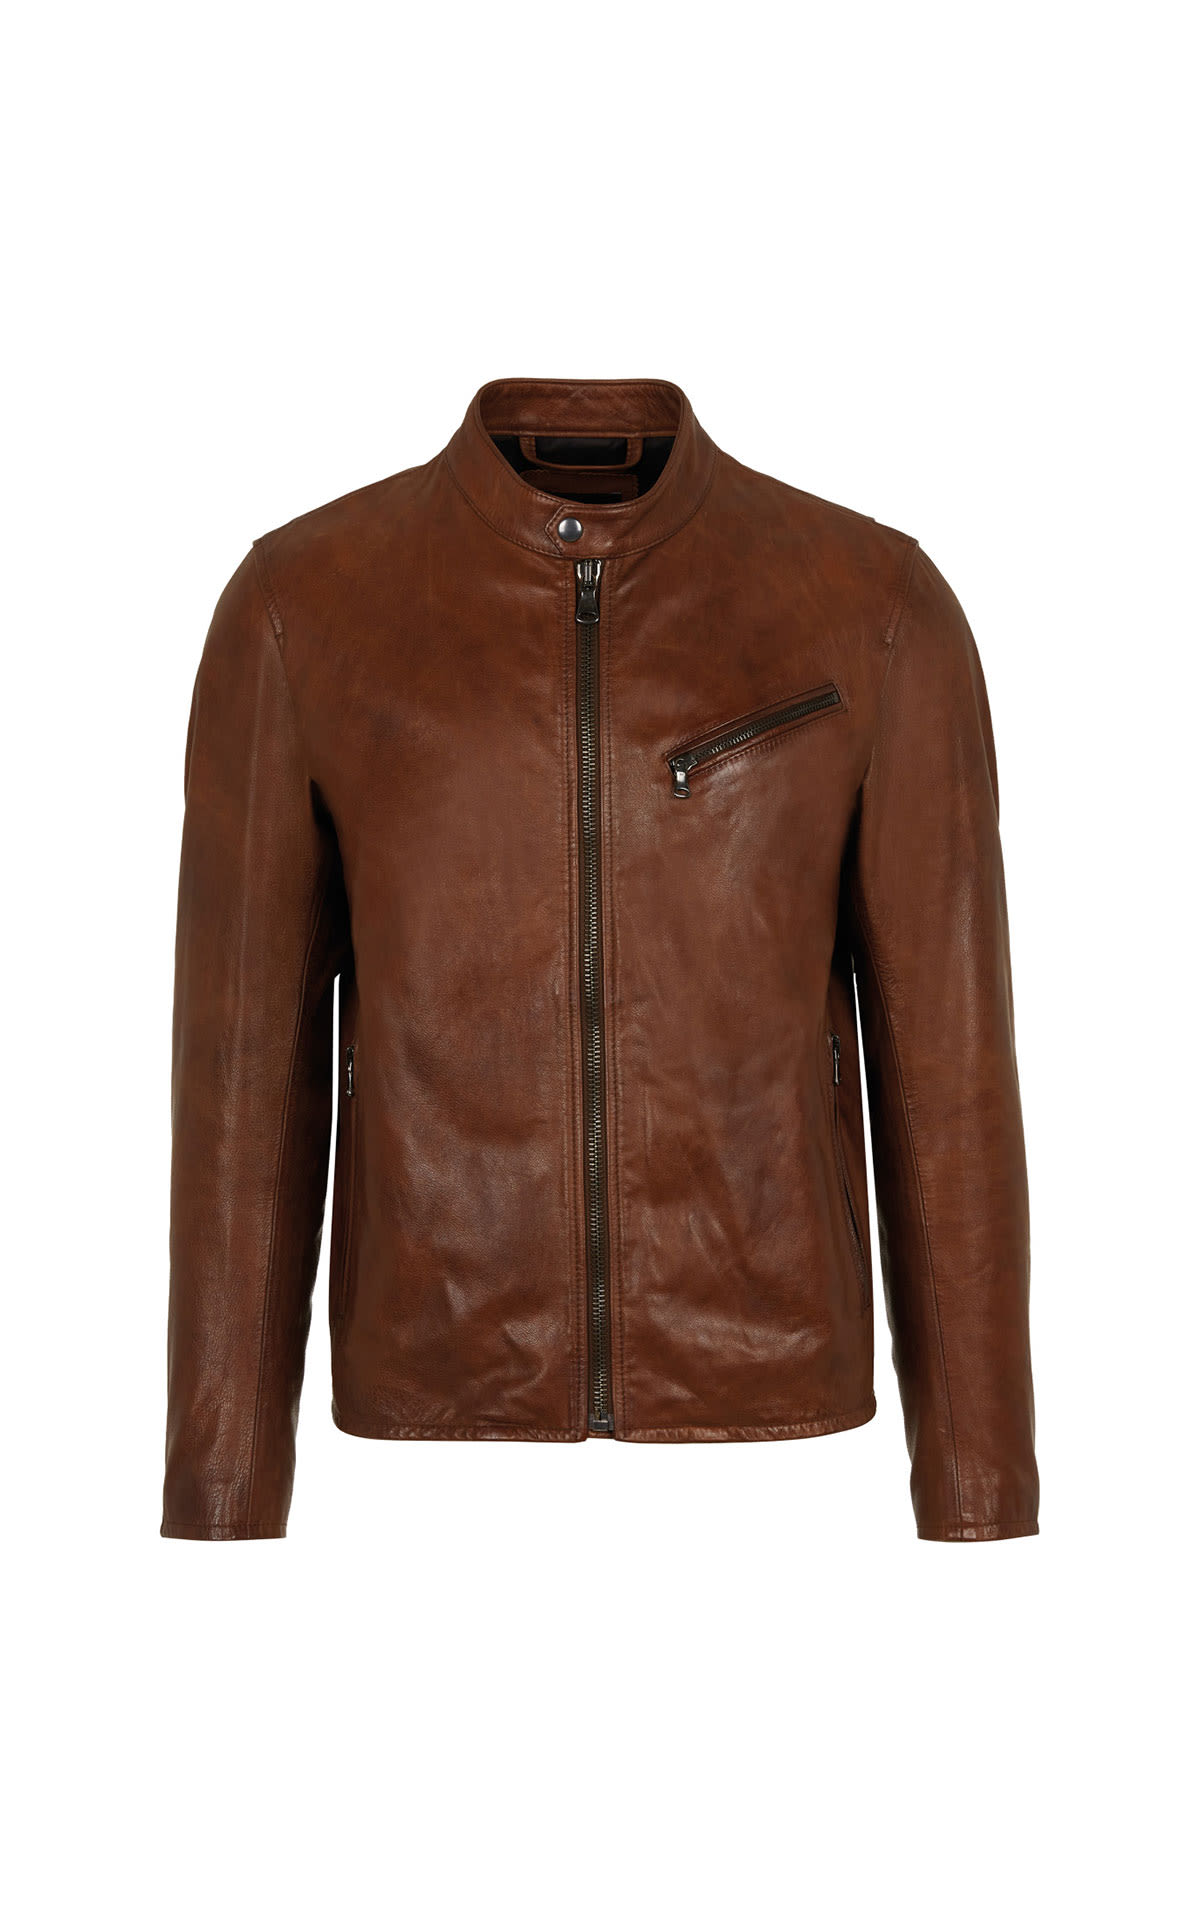 7 For All Mankind Biker jacket leather from Bicester Village